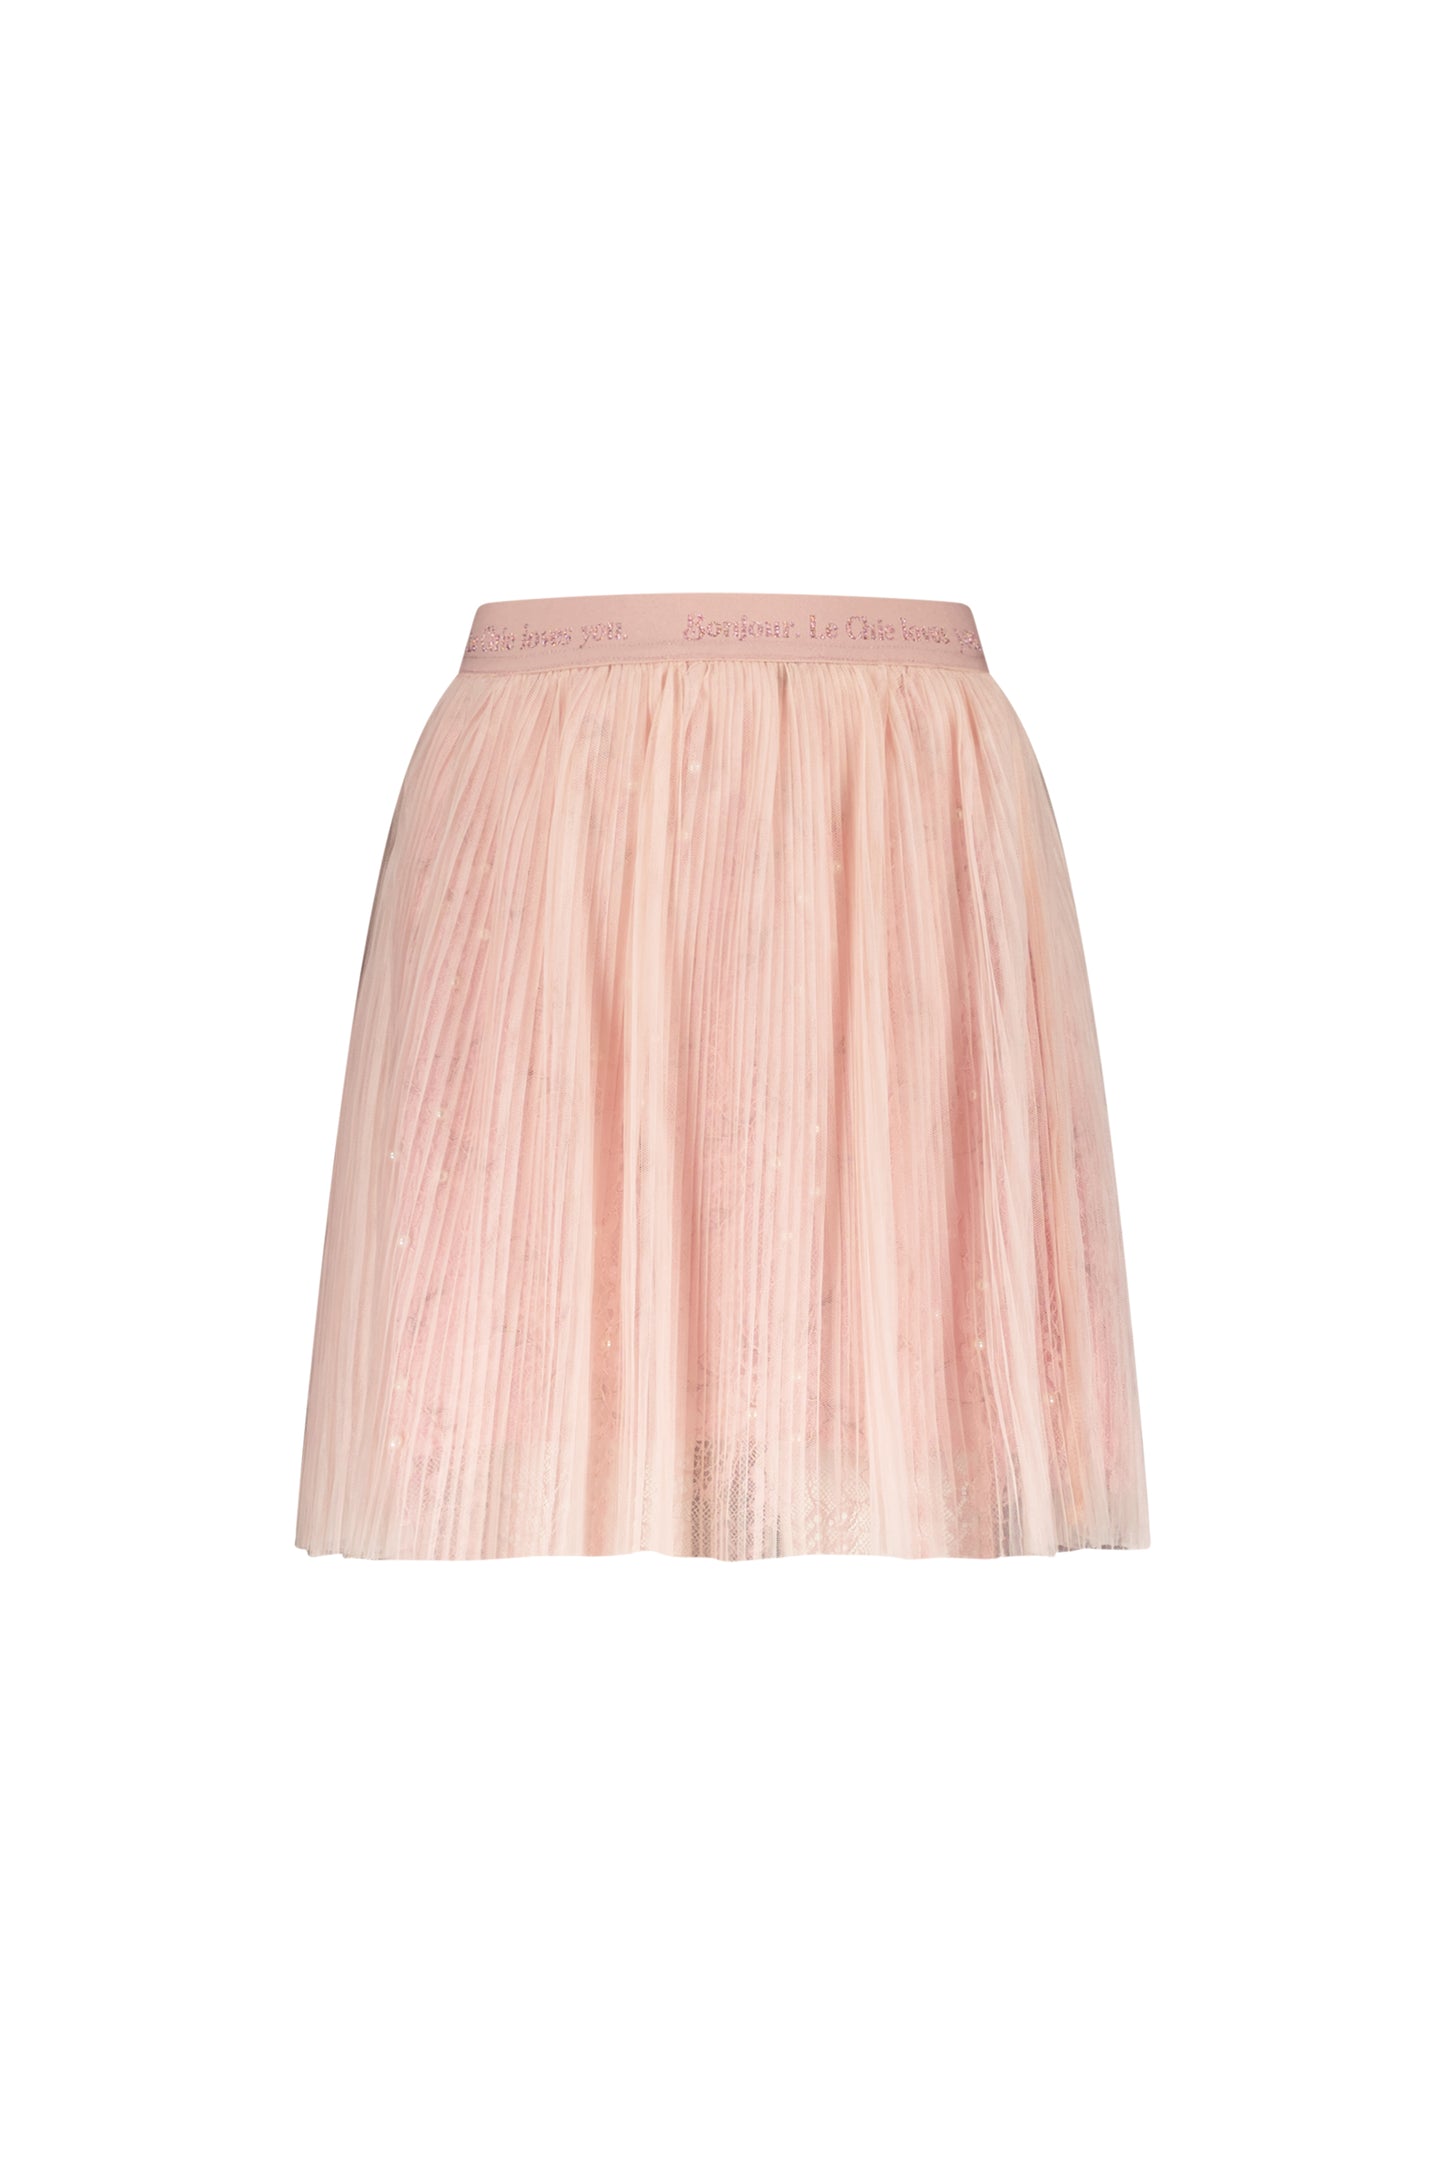 LE CHIC TRUTHY MESH & PEARLS SKIRT